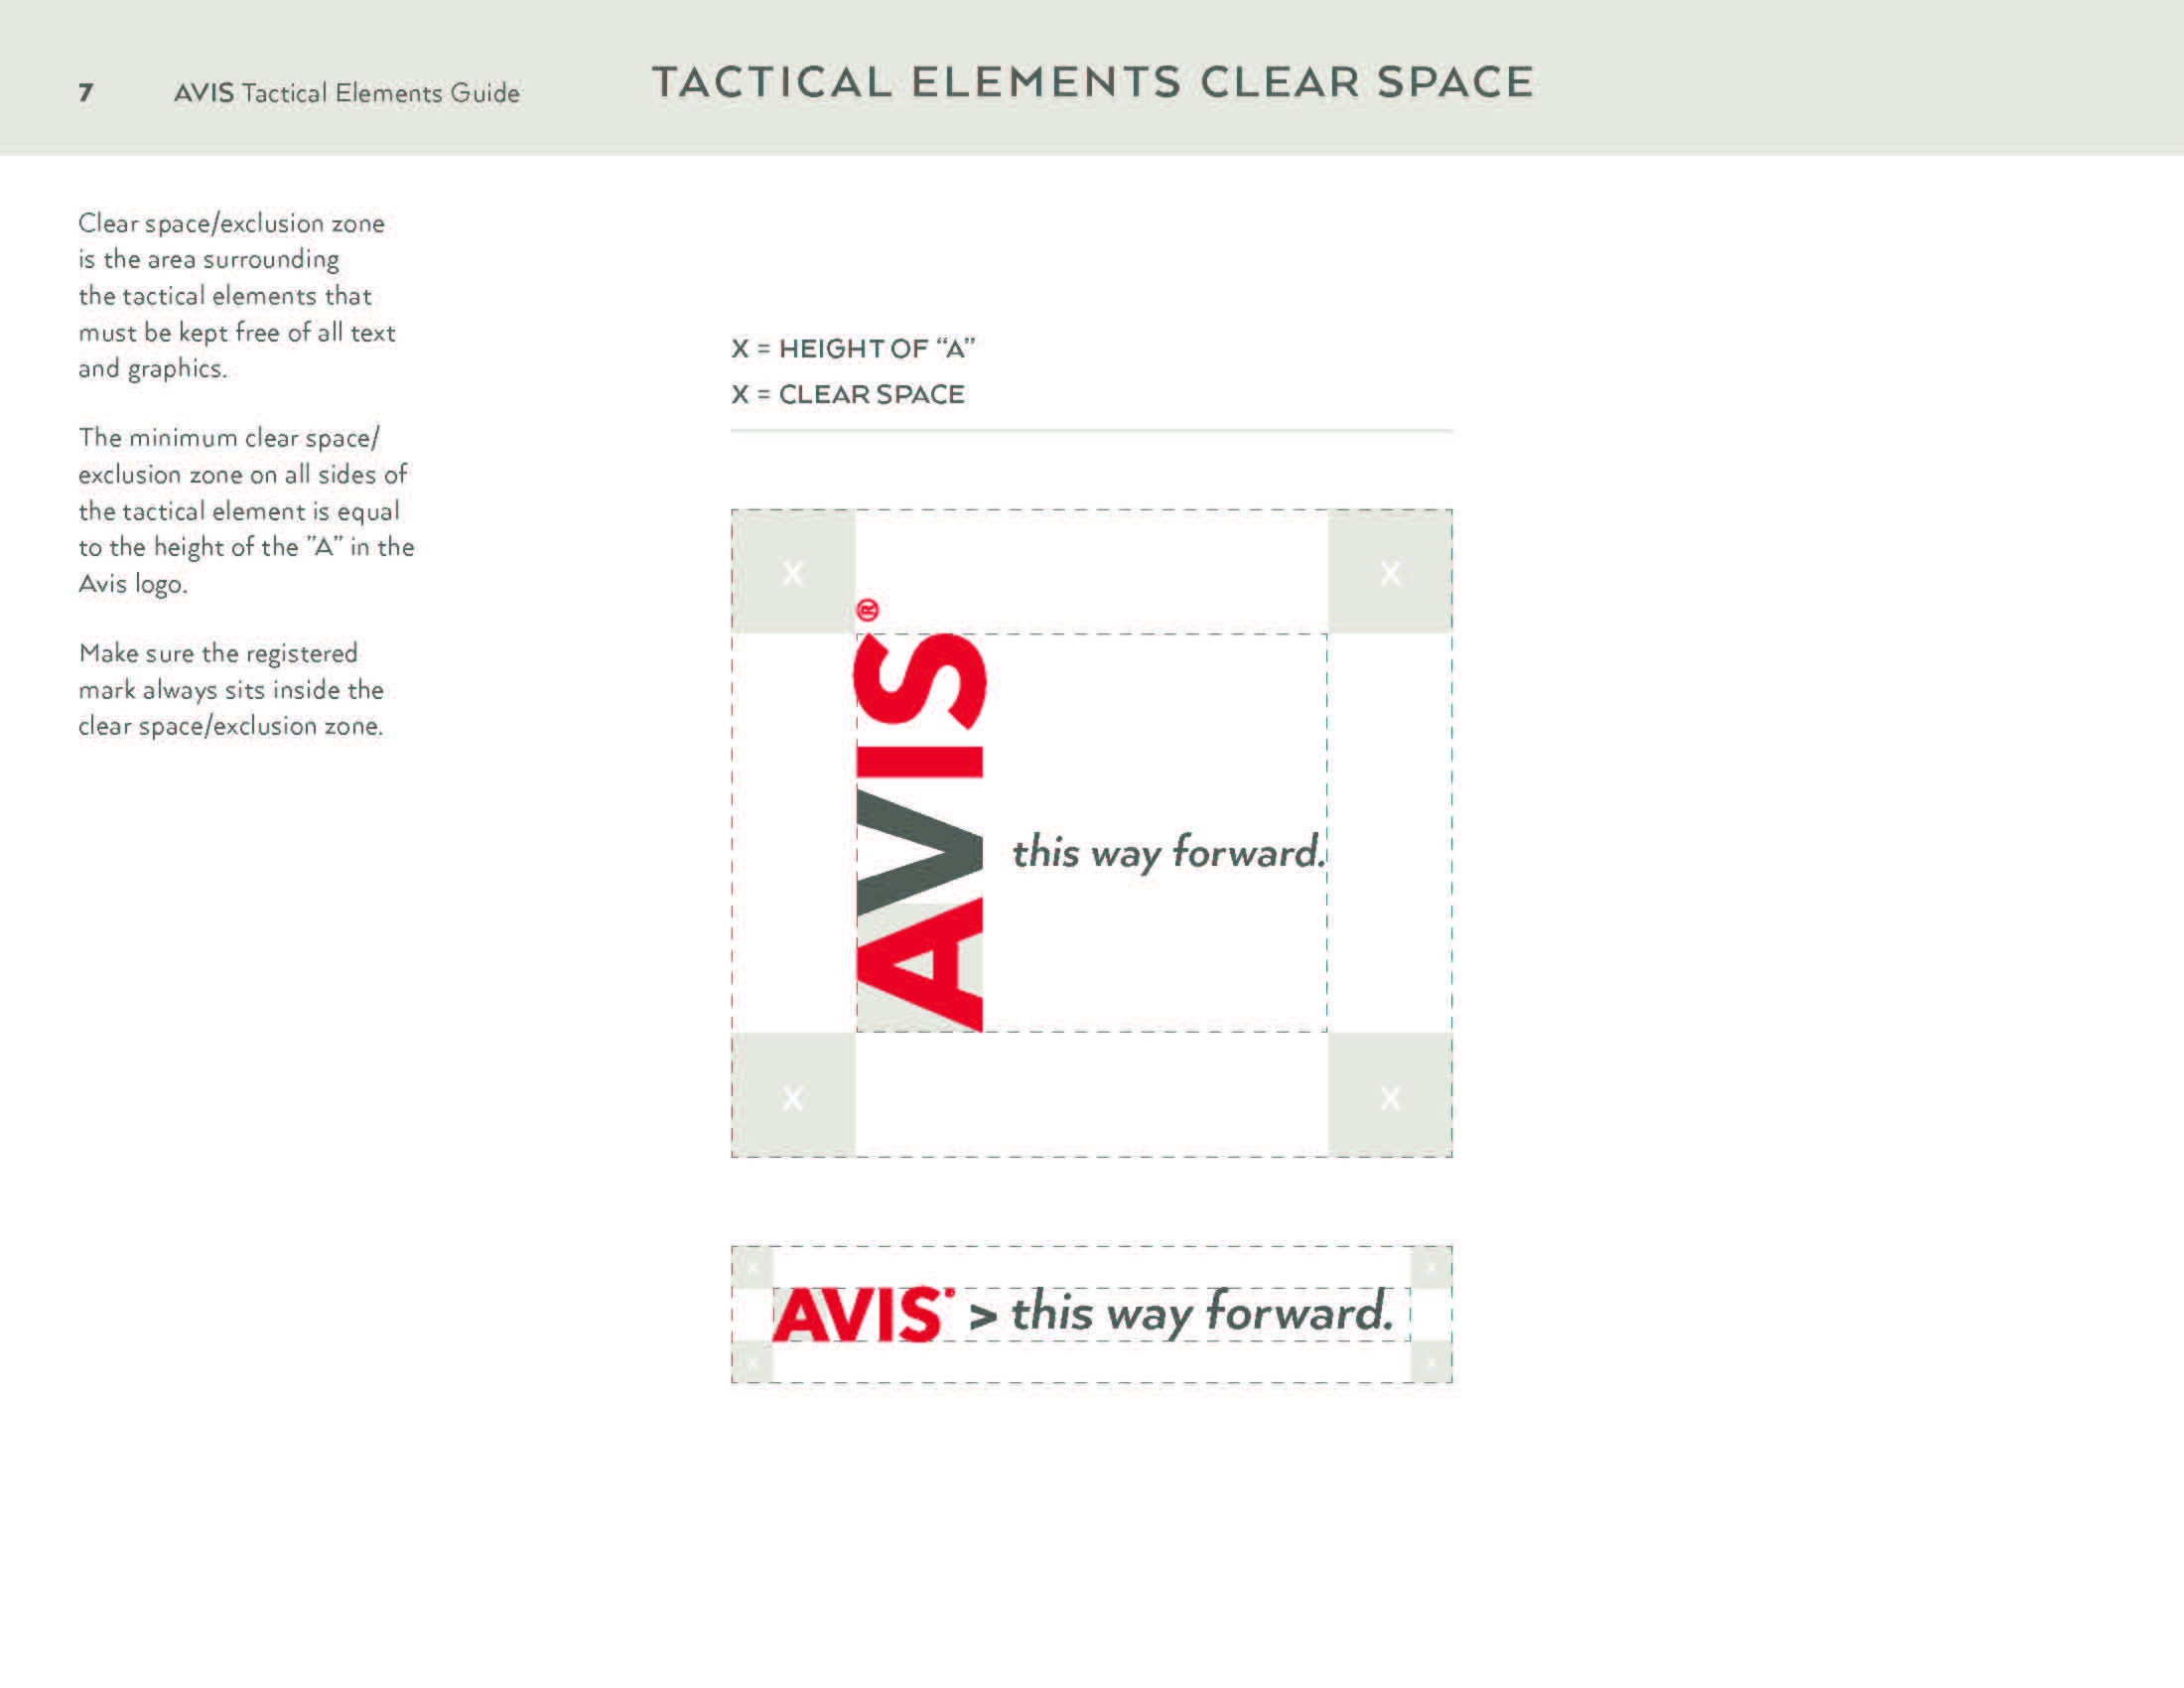 Avis Tactical Elements Guide-102116_Page_07